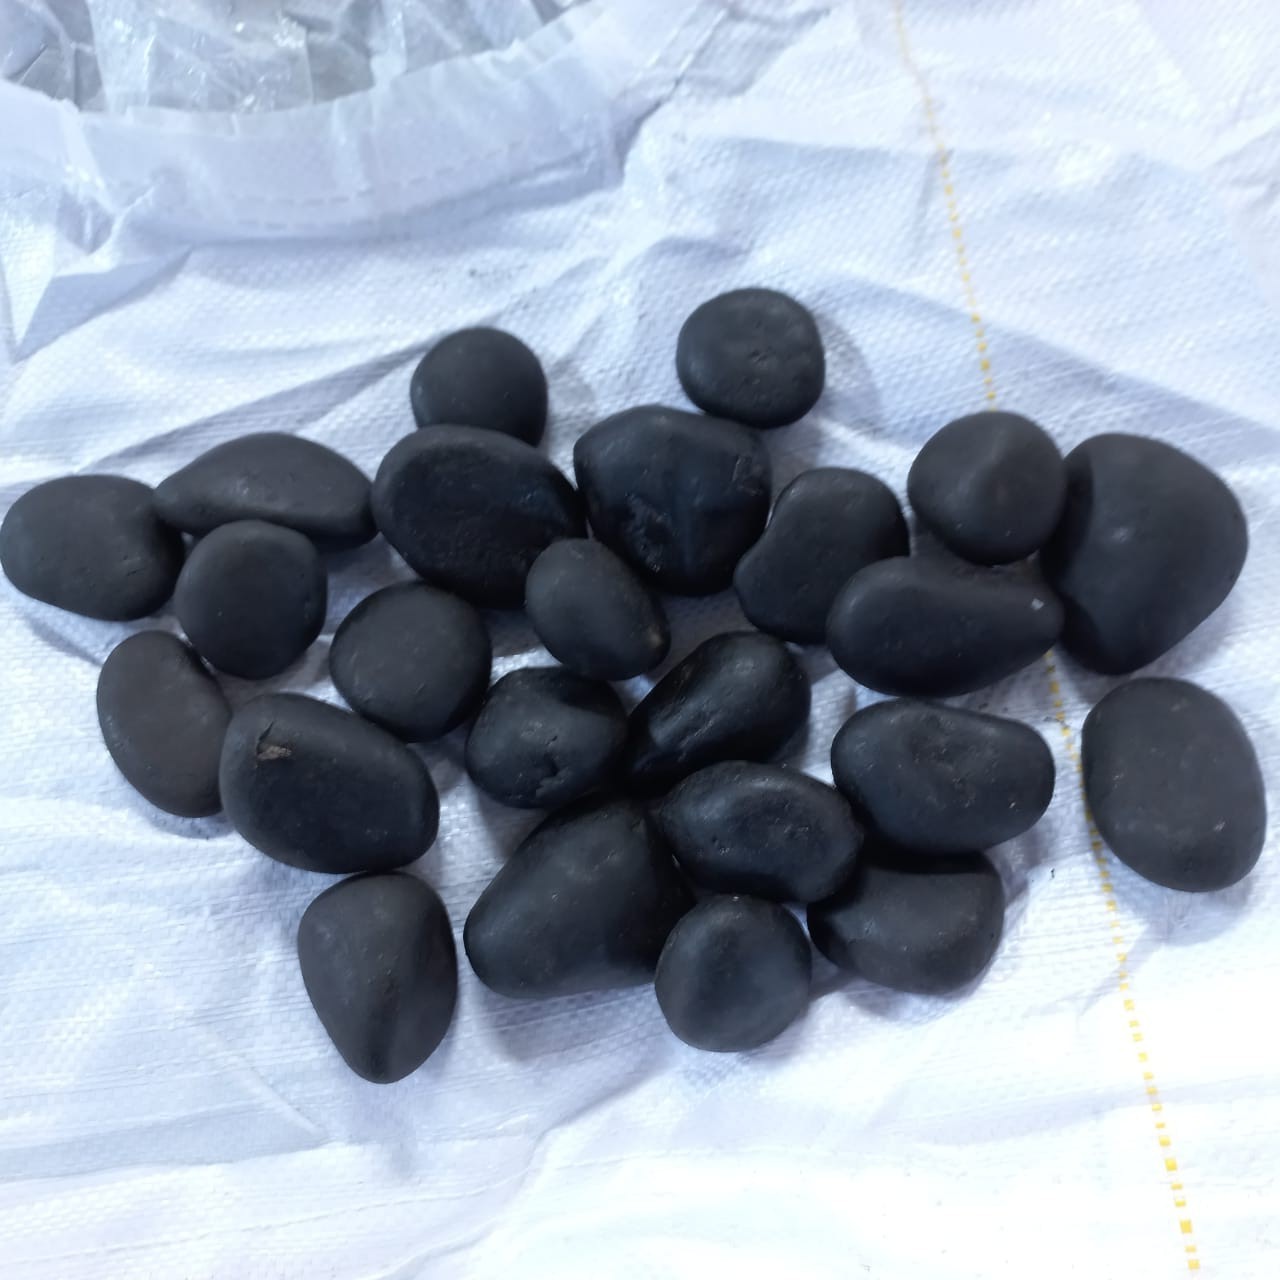 Polished high Glossy cheap price Black Natural Round Pebbles Stone landscaping application bulk stockist